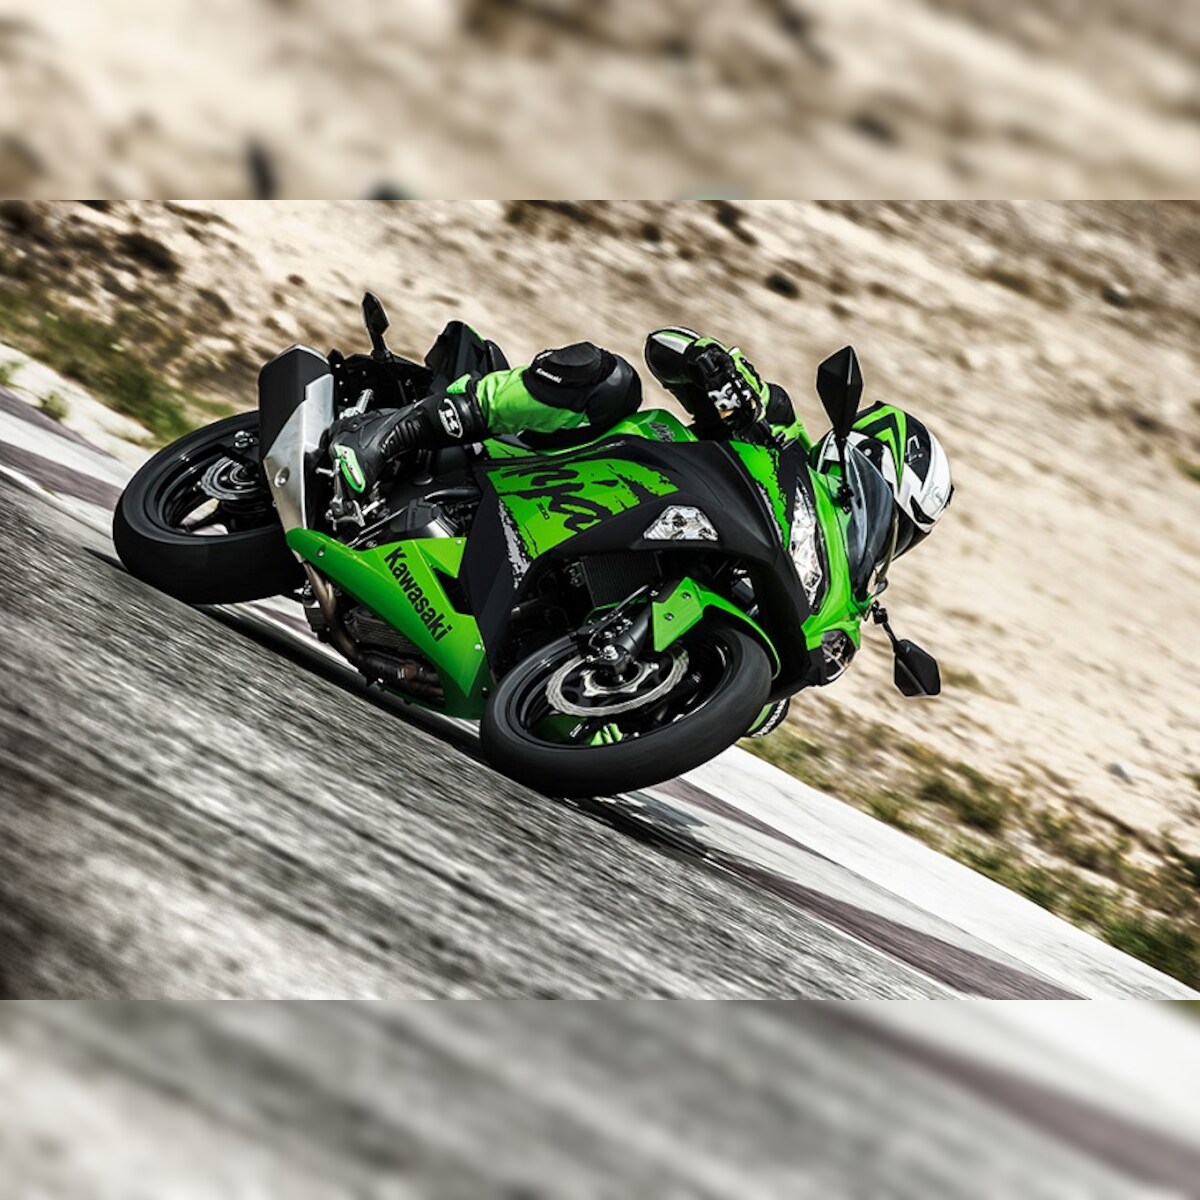 genvinde kritiker genopretning Most Affordable Kawasaki Ninja 300 Launched in India for Rs 2.98 Lakh - See  Pics